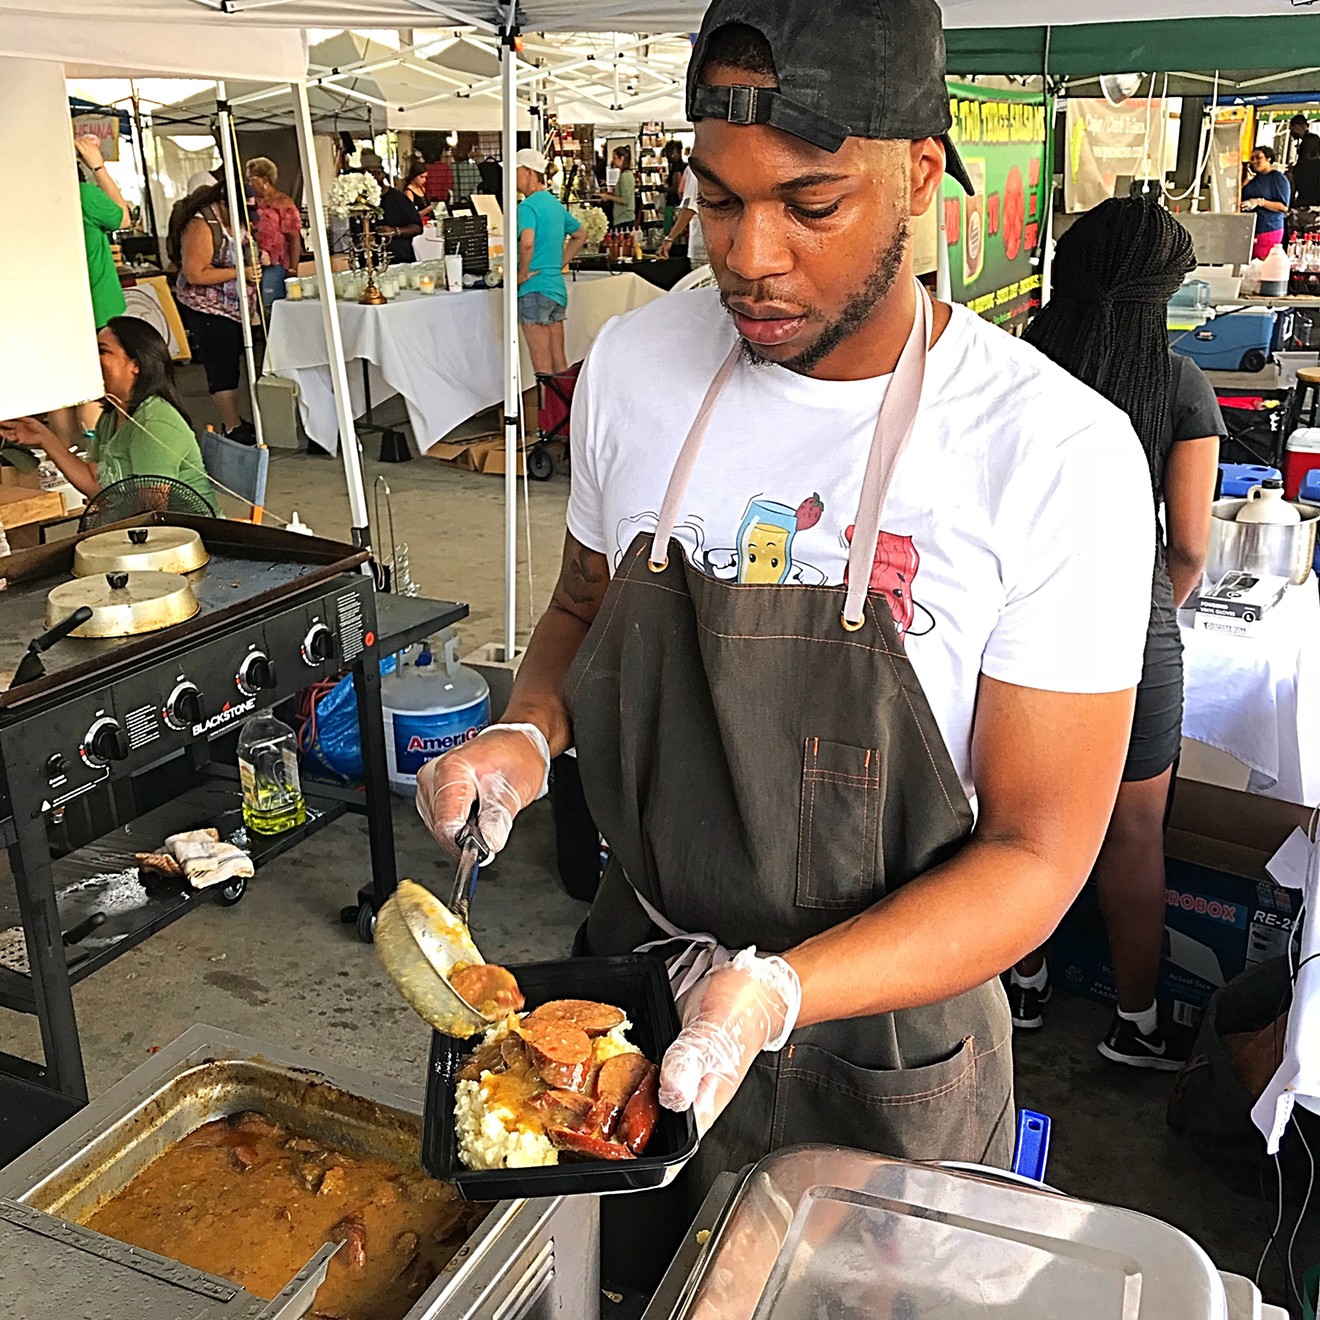 Jessie Washington, owner of the Brunchaholics food stand at Dallas Farmers Market, wants to shake up the Dallas brunch scene.